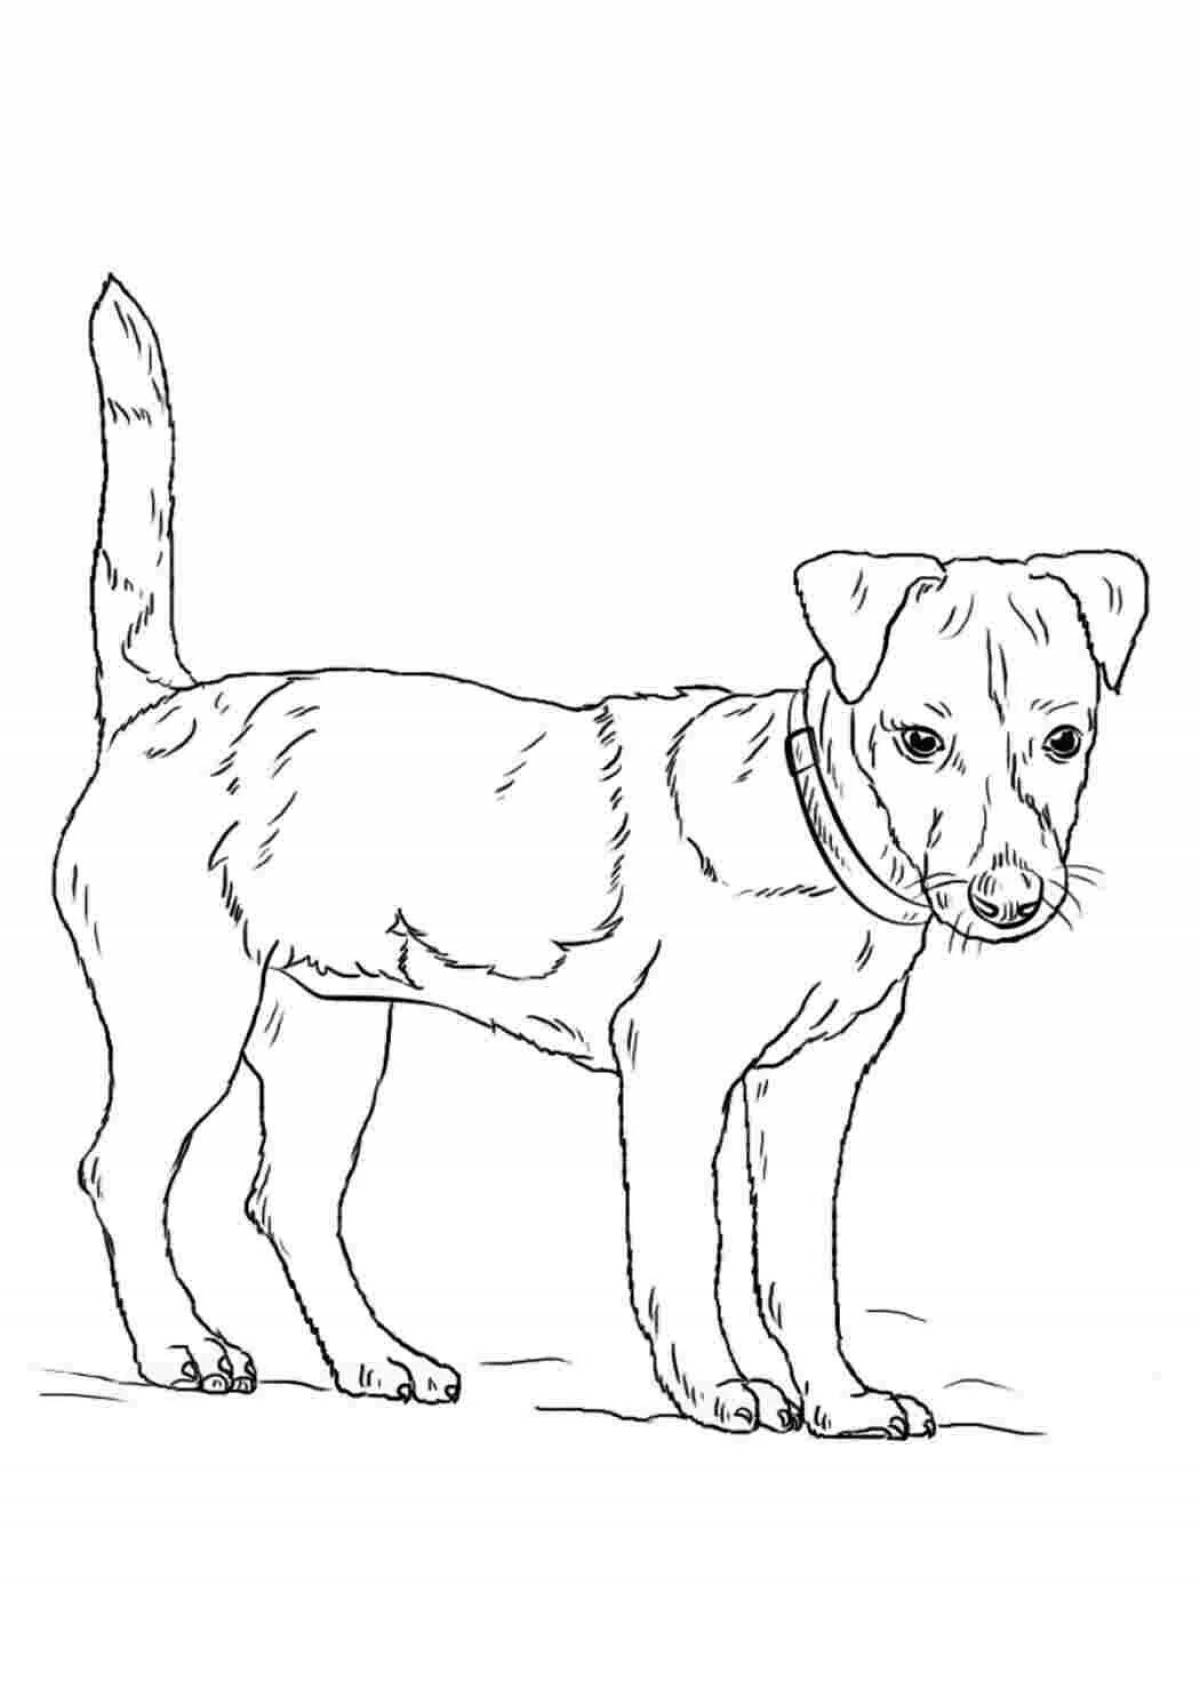 Jack russell terrier dog #1